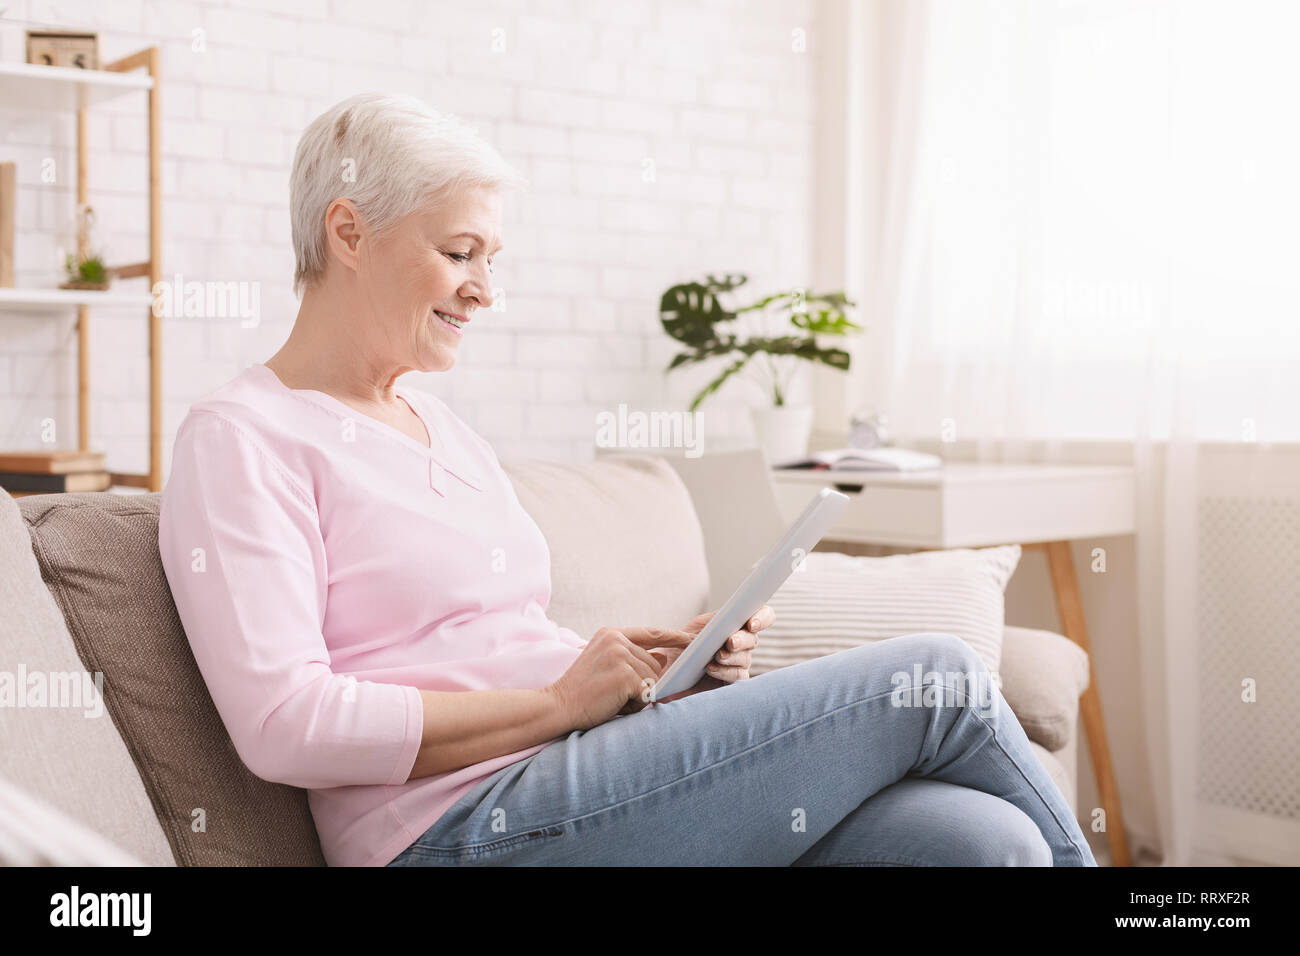 Smiling Beautiful woman using digital tablet Banque D'Images